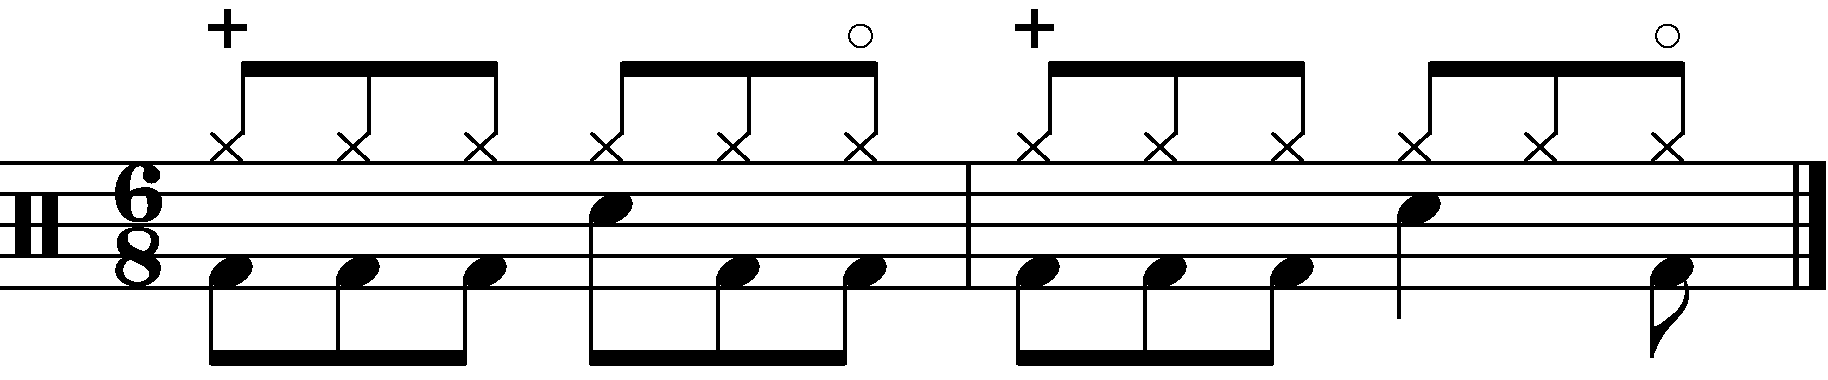 The Hi Hat Part for example 4 with groove added in